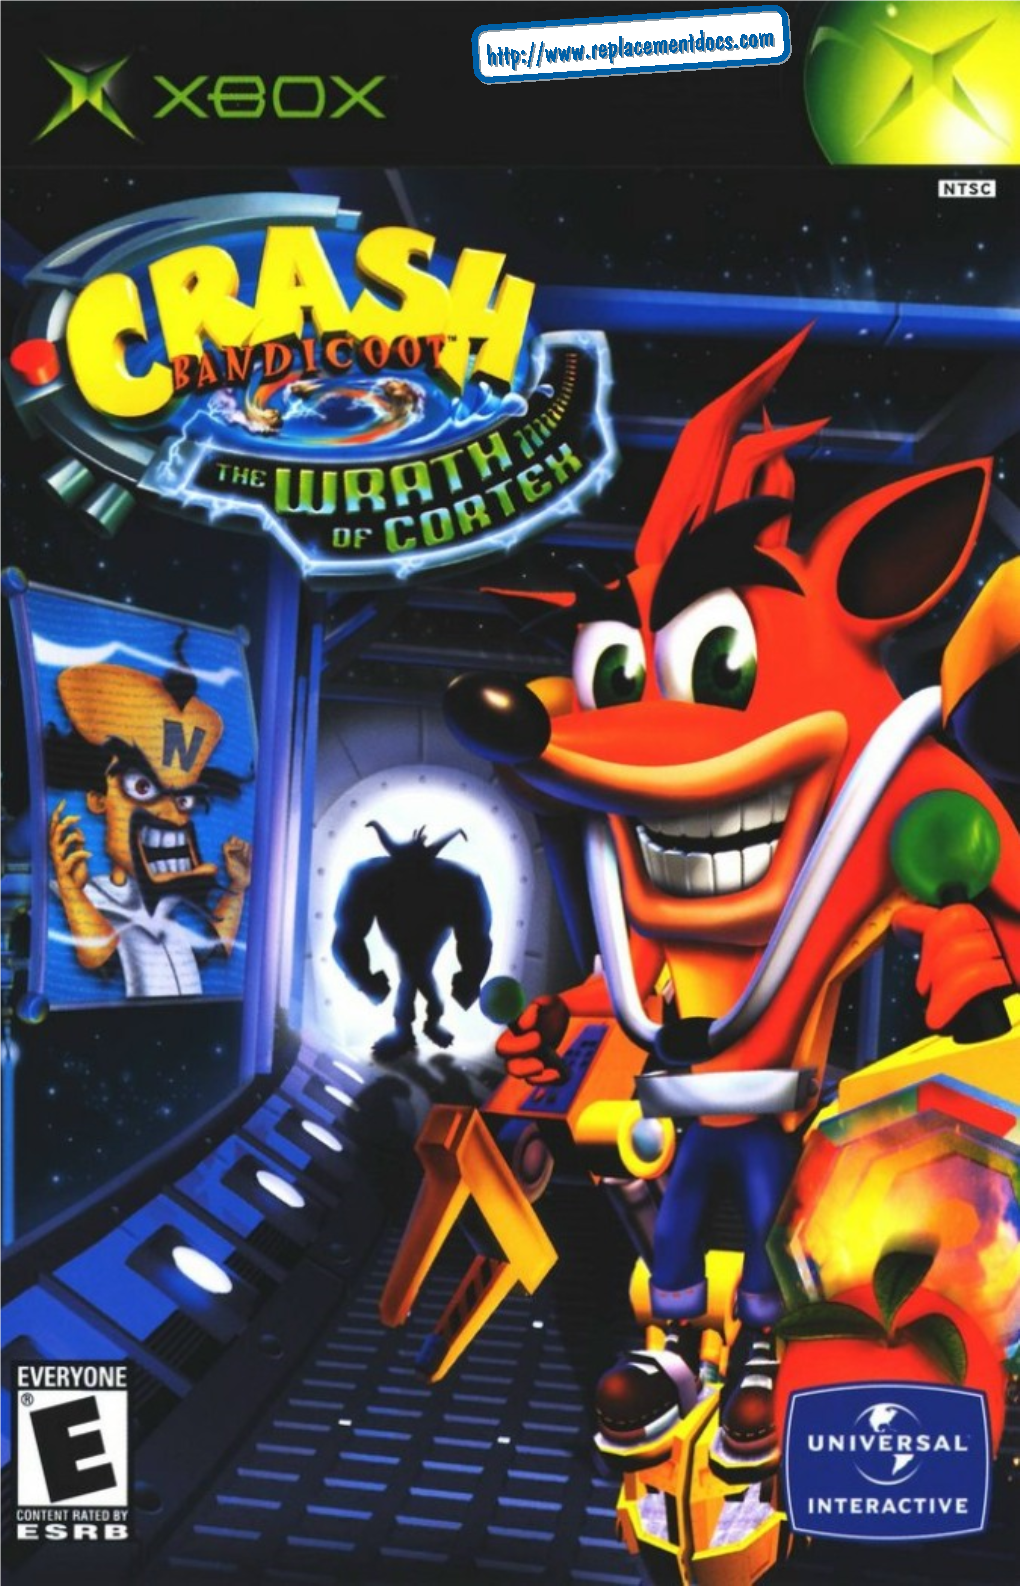 Crash Bandicoot: the Wrath of Cortex™ Disc on the Open Disc Tray with the Label Facing up and Close the Disc Tray